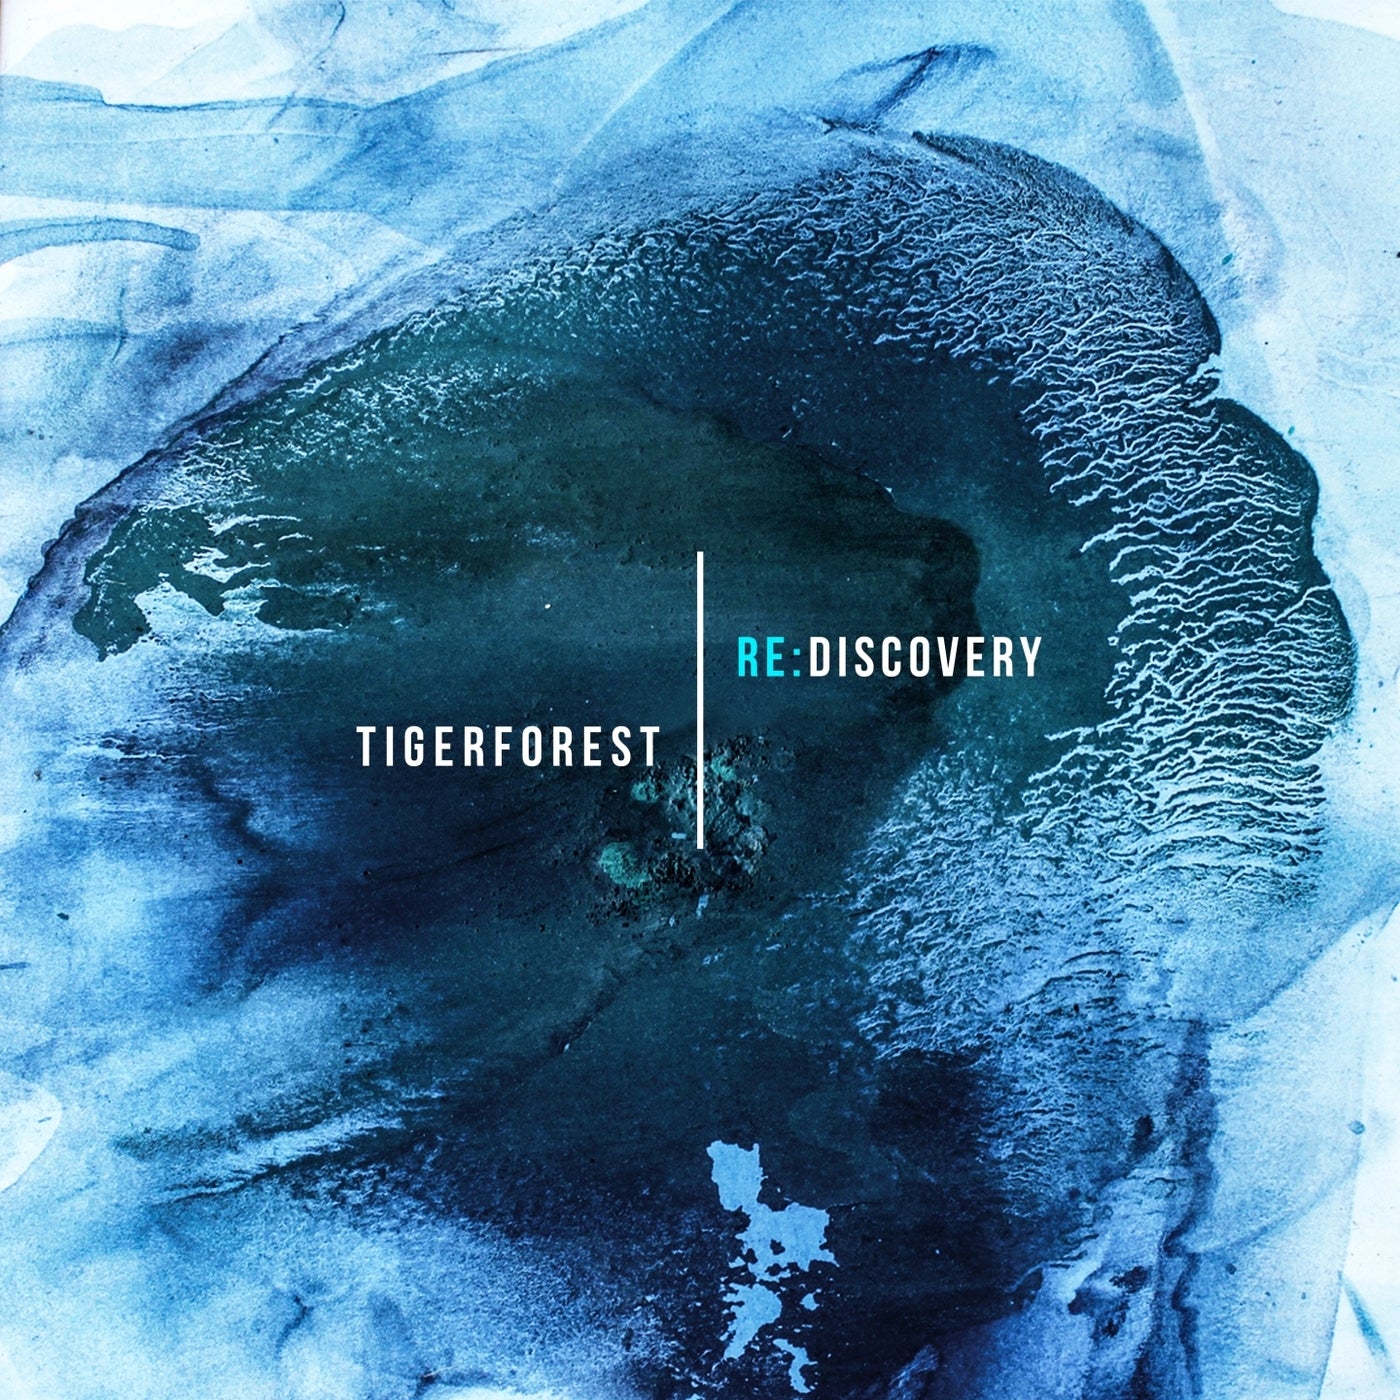 Re: Discovery